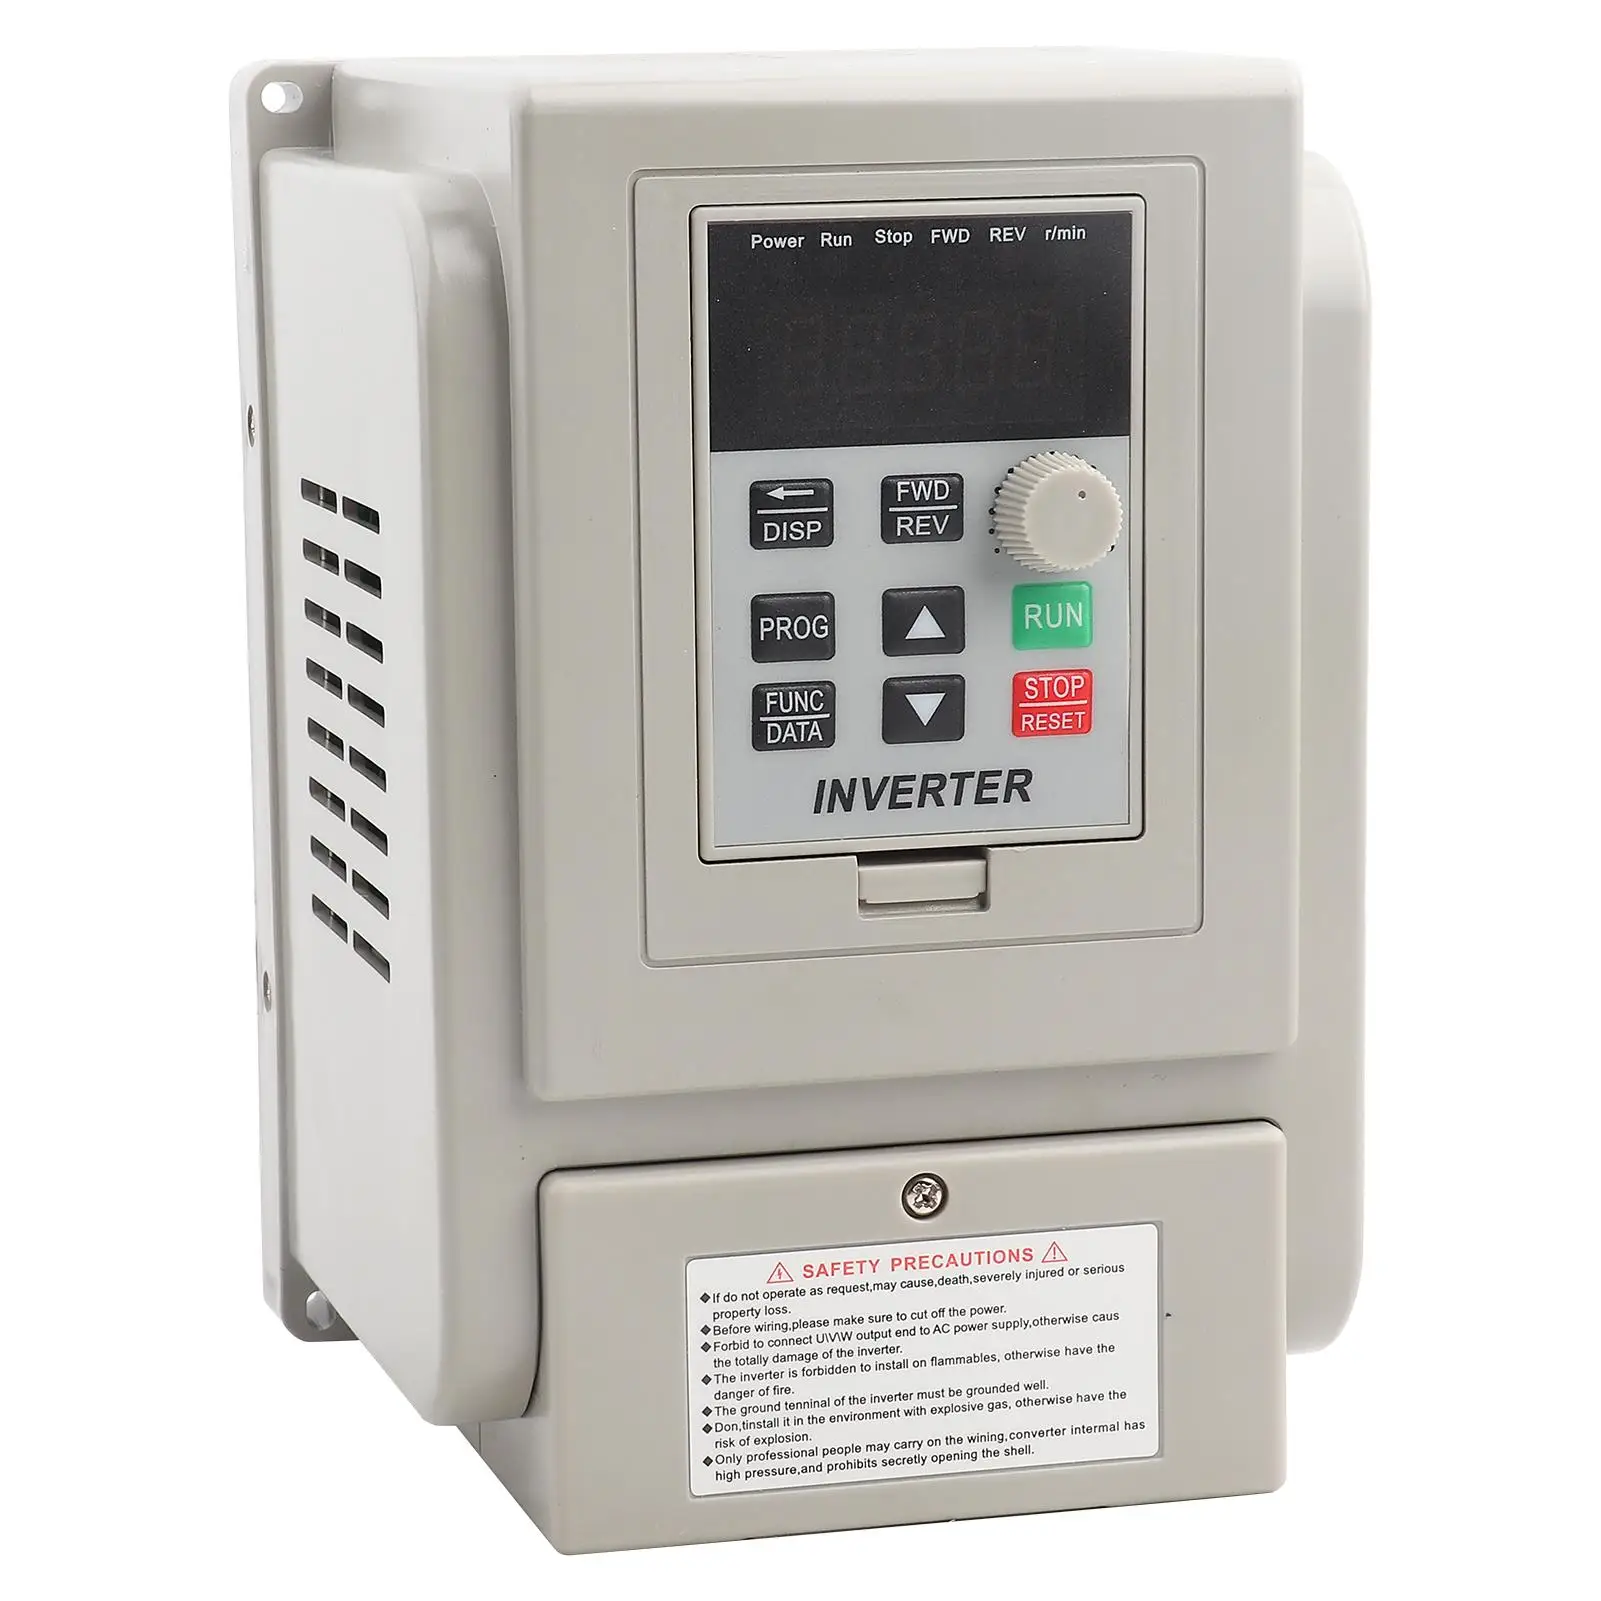 

0.45 4kW 220V Inverter Spindle Motor Speed Control Frequency Drive VFD for 3 phase AC Motor